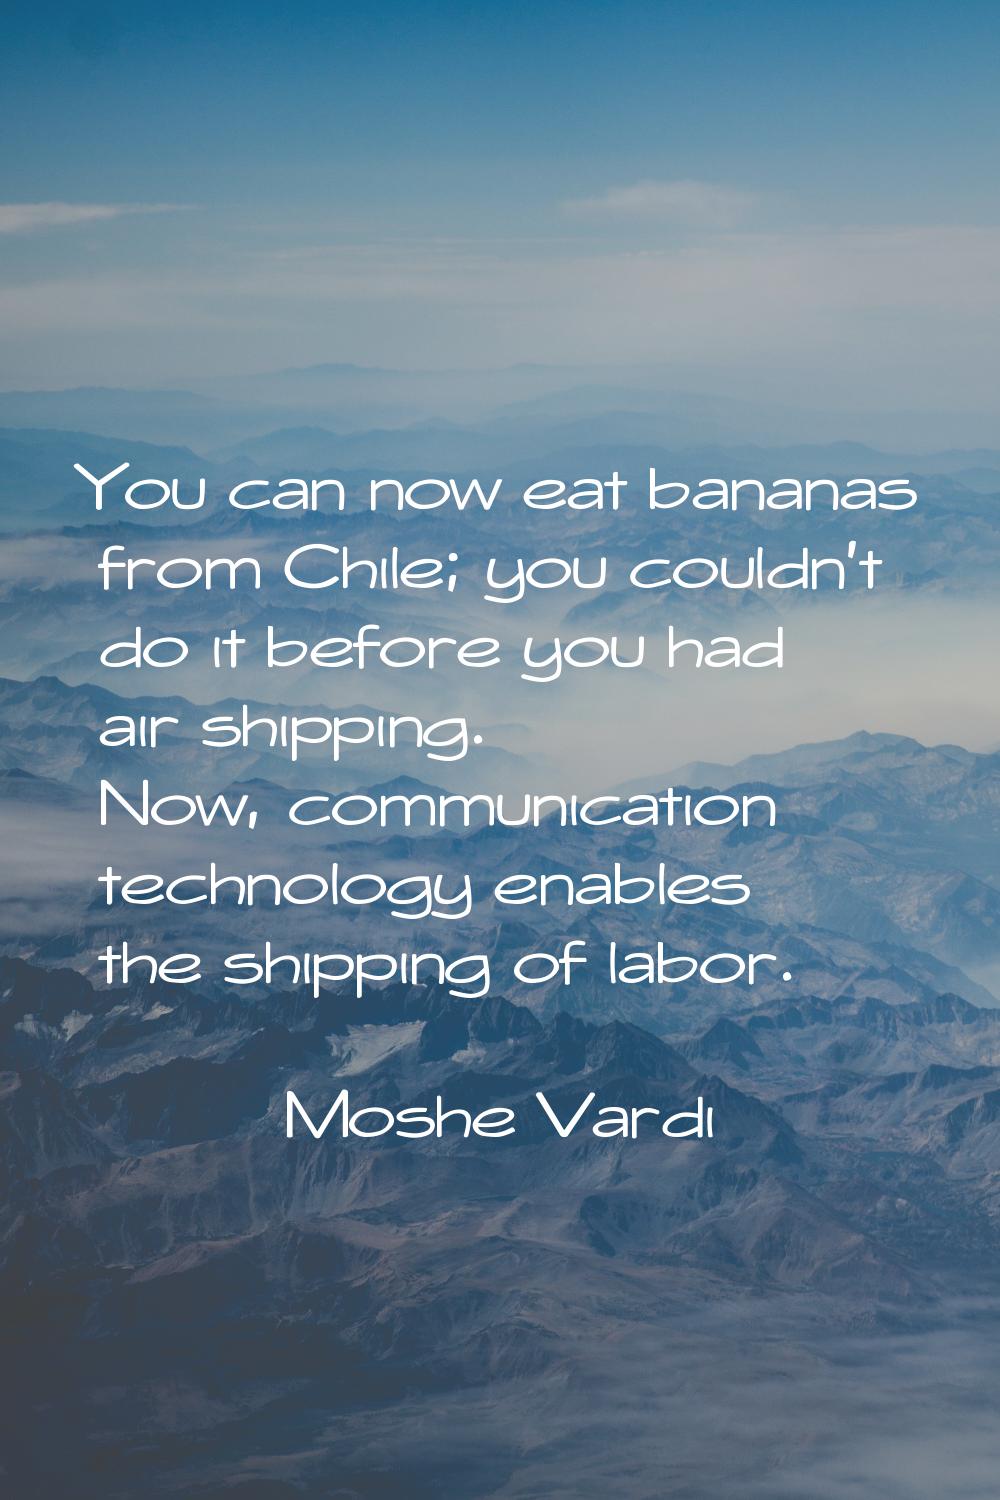 You can now eat bananas from Chile; you couldn't do it before you had air shipping. Now, communicat